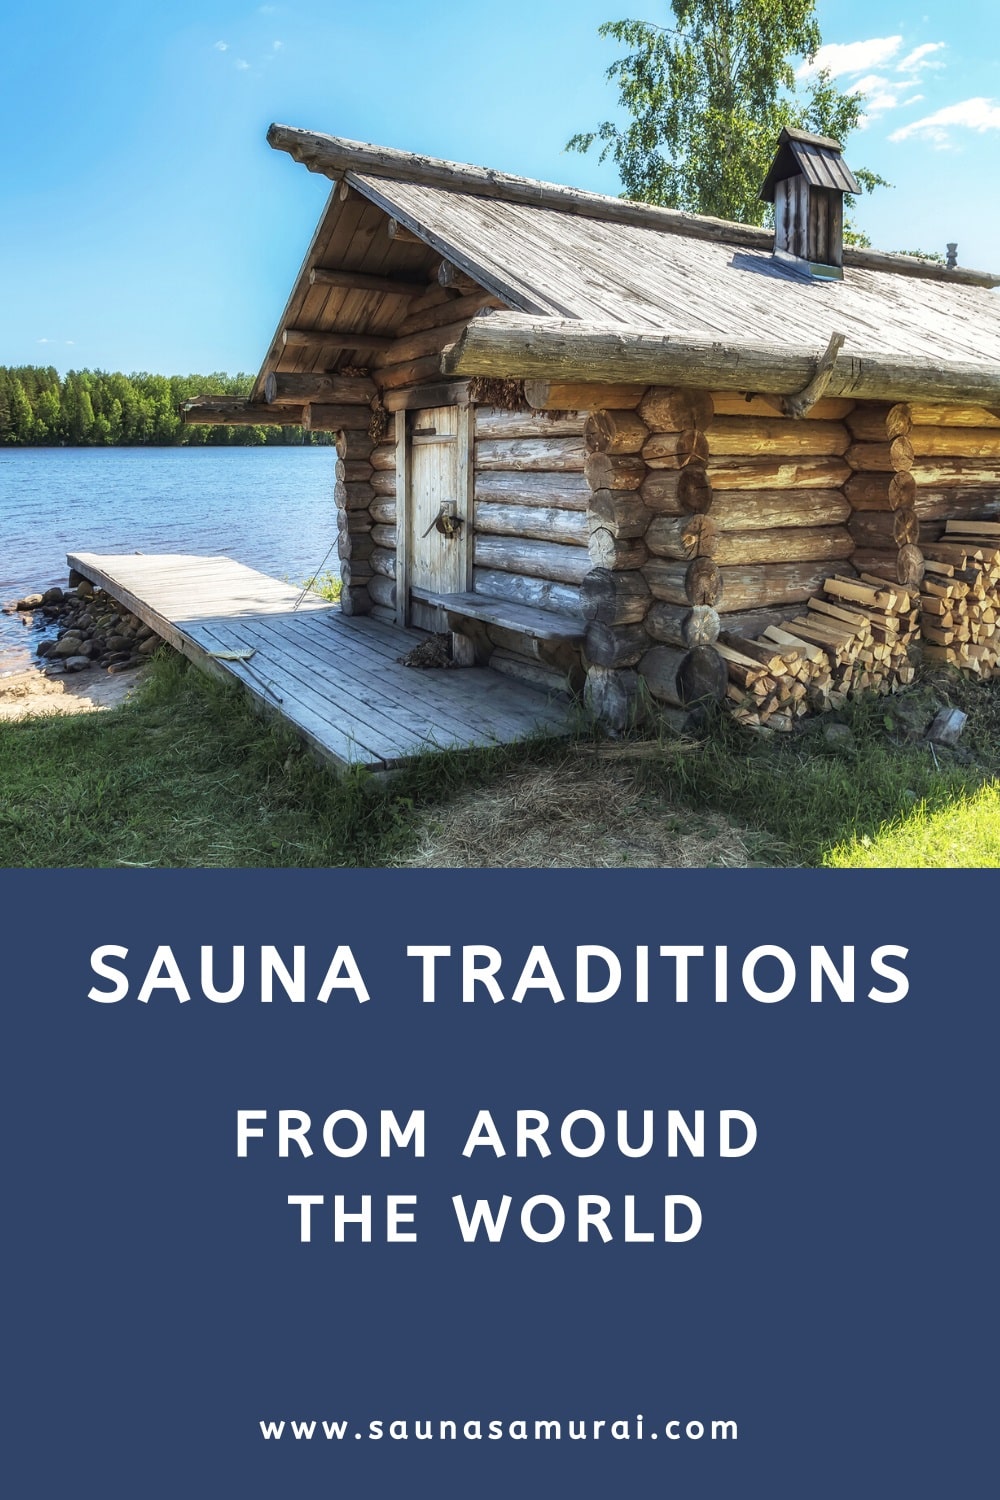 Sauna traditions from around the world